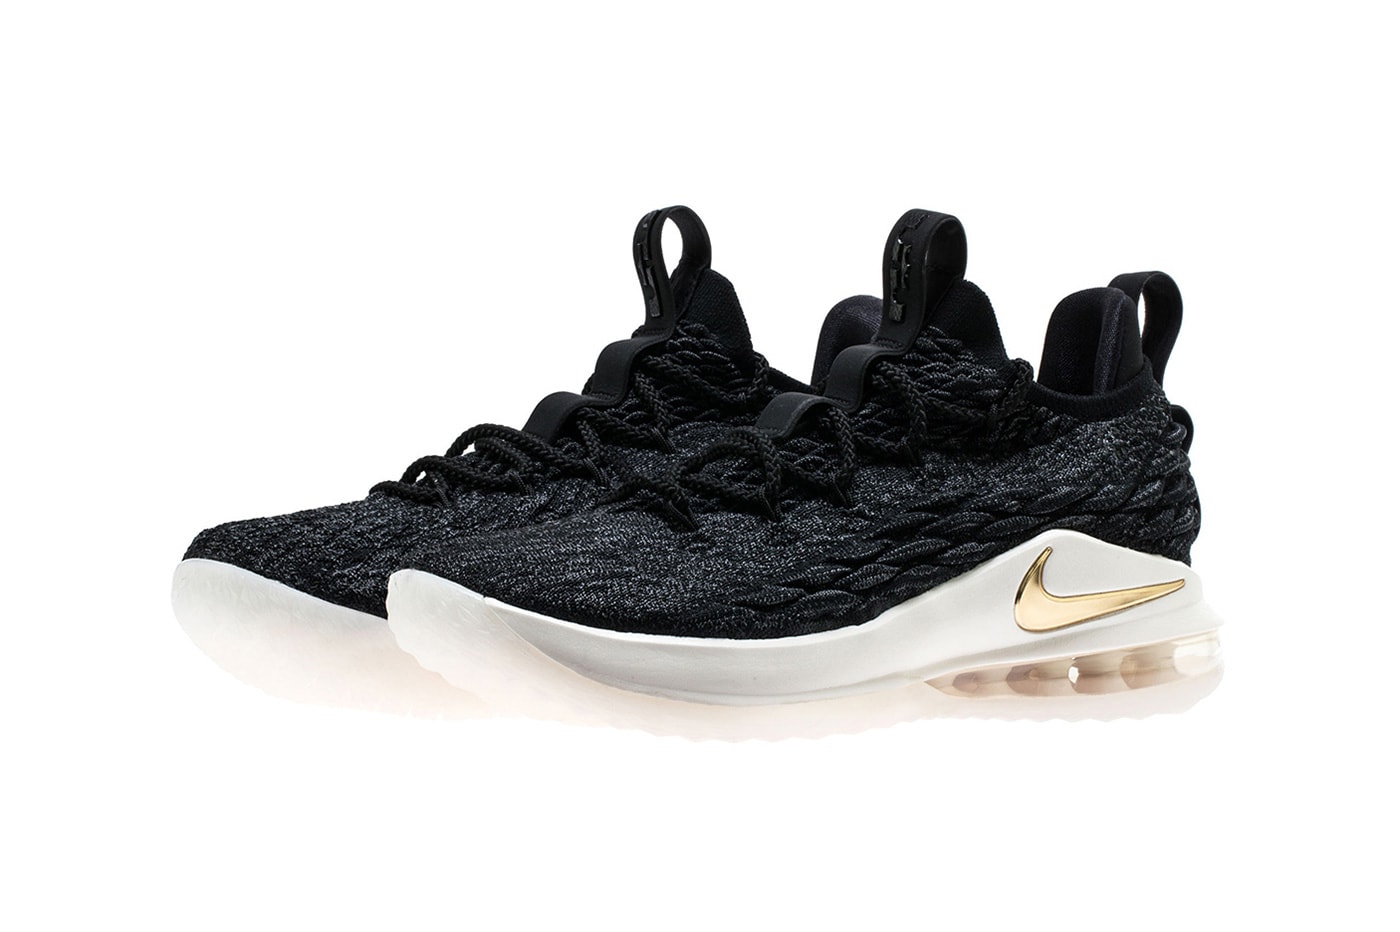 Nike LeBron 15 Low black gold may 2018 lebron james nike basketball may release date info drop sneakers shoes footwear